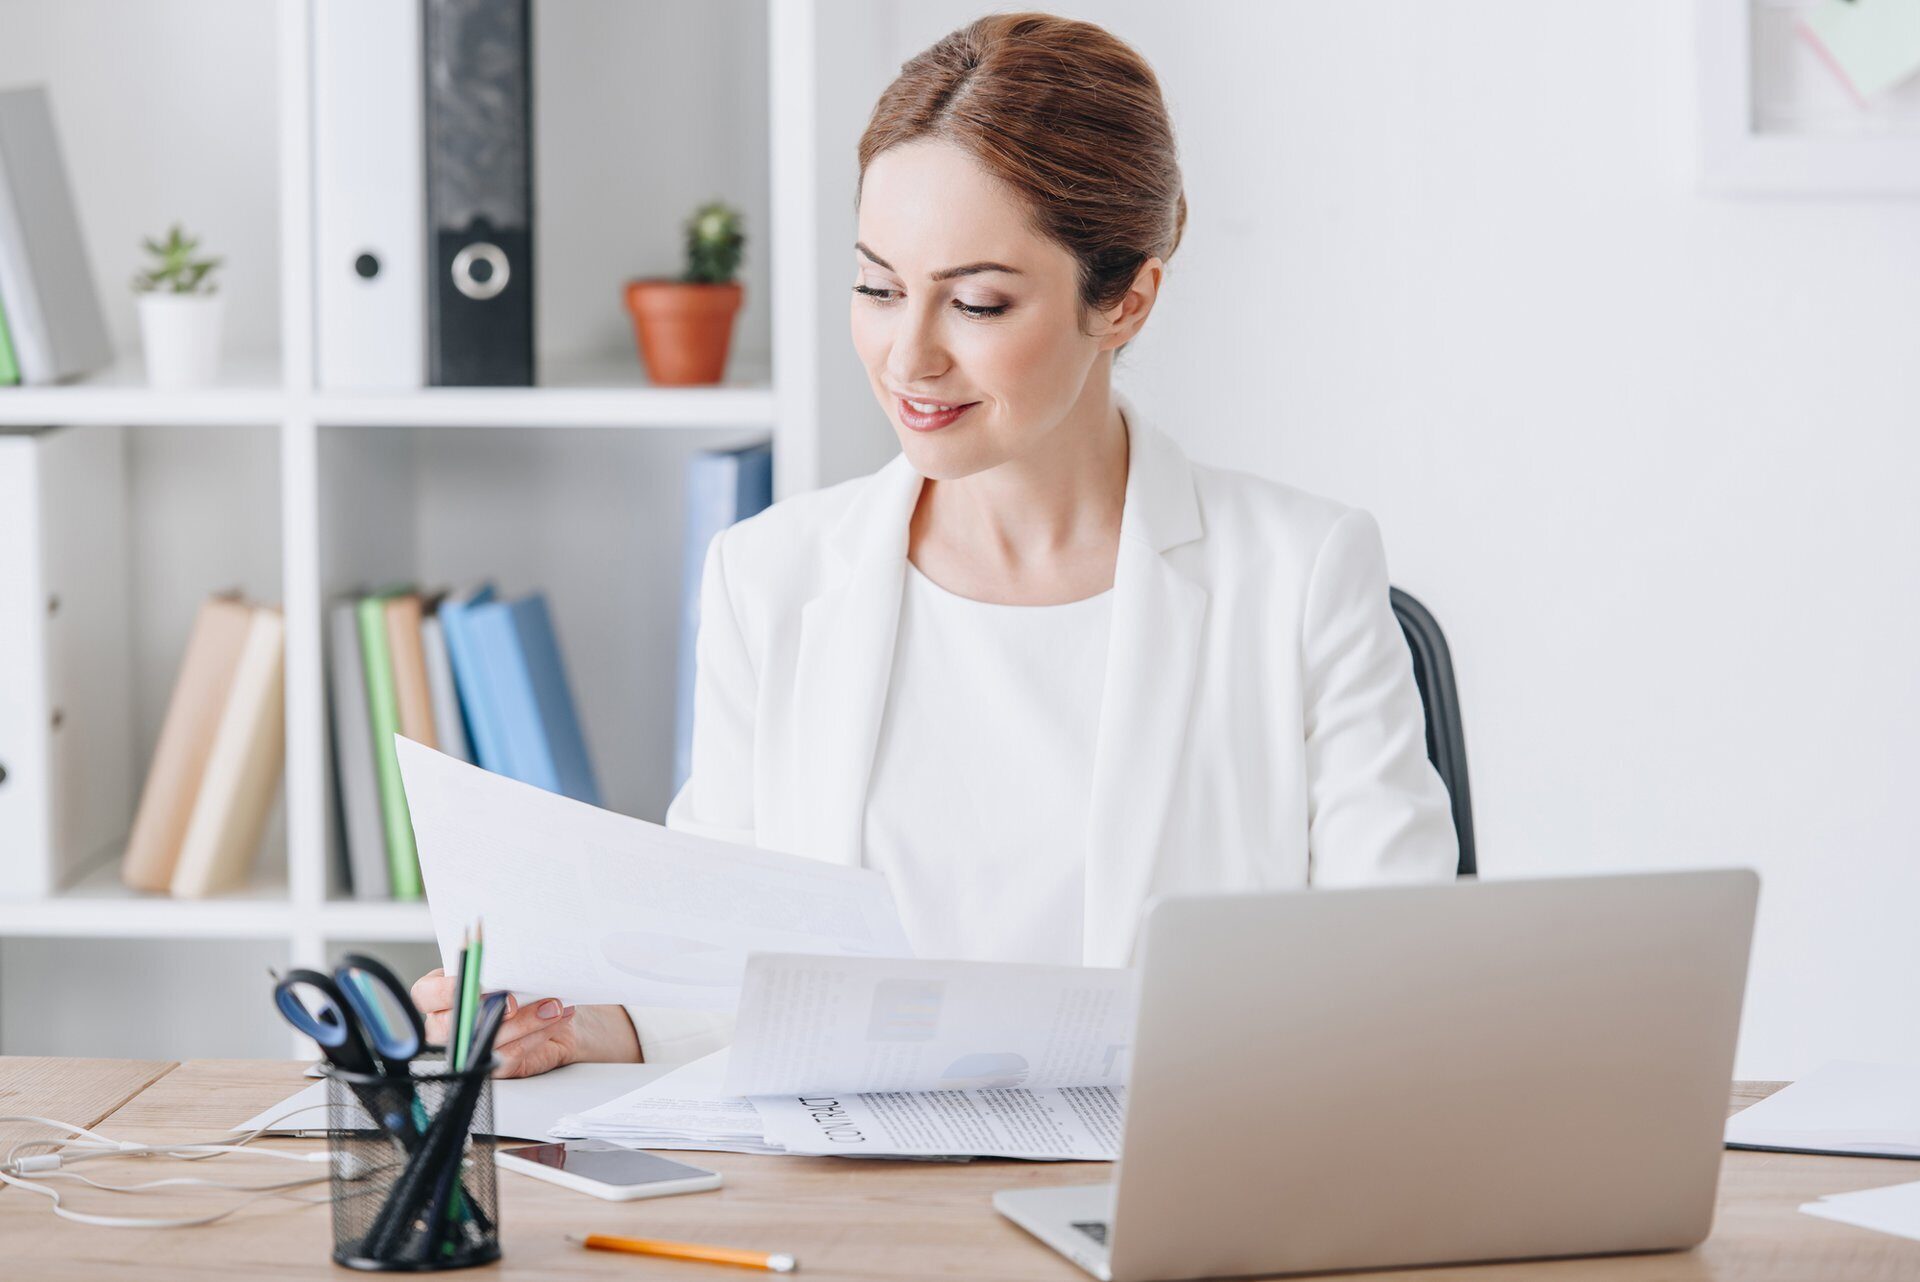 beautiful executive businesswoman working with documents and laptop at workplace in modern office